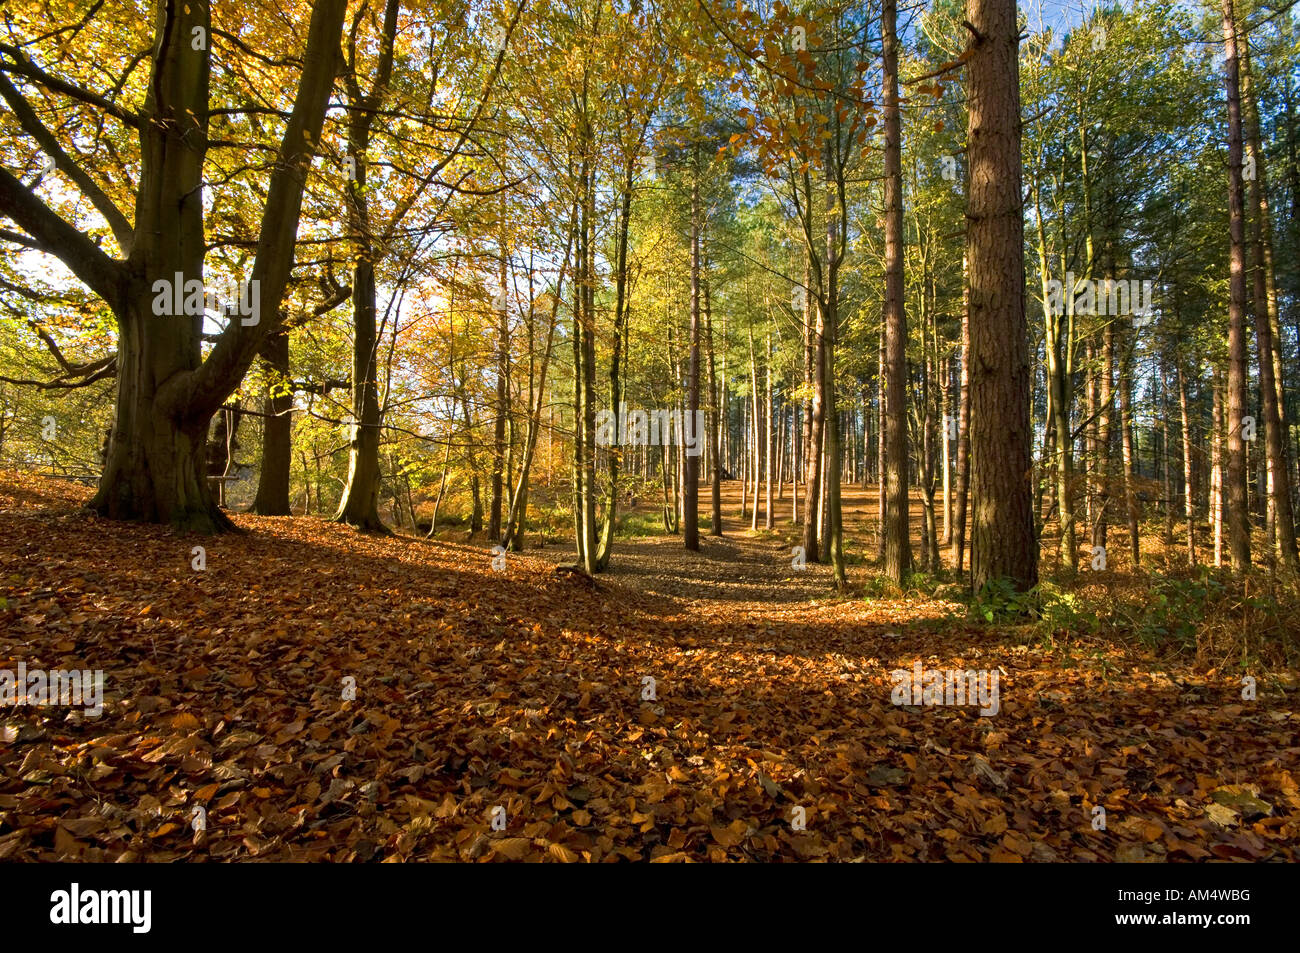 A Carpet of Autumnal Leaves Covers the Ground in Delamere Forest, Cheshire, England, UK Stock Photo